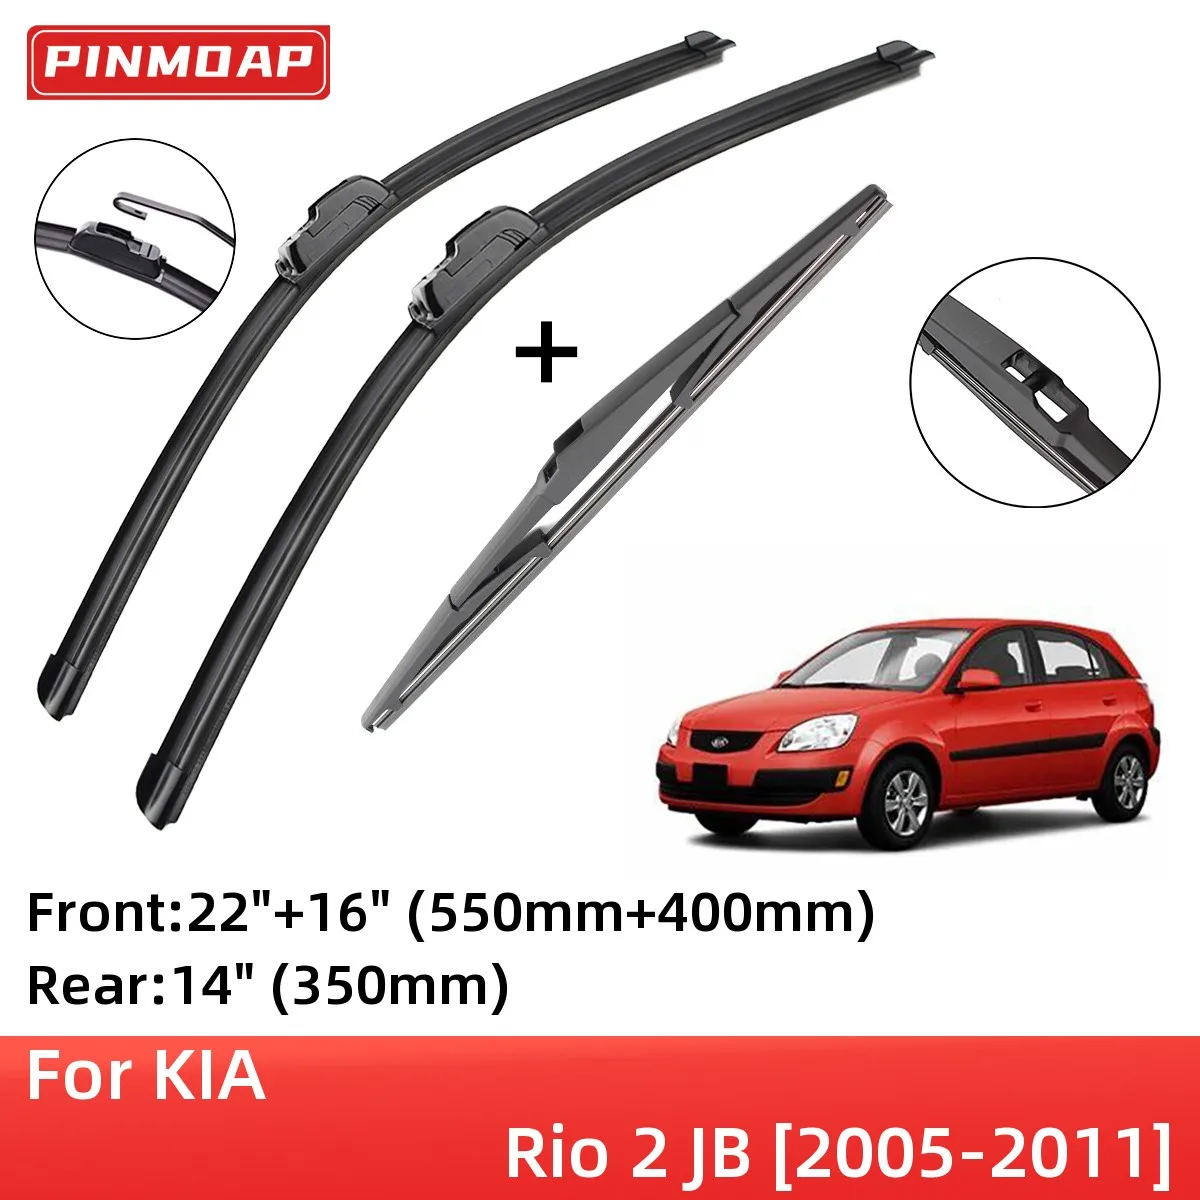 For KIA Rio 2 JB 2005-2011 Front Rear Wiper Blades Brushes Cutter Accessories J Hook 2005 2006 2007 2008 2009 2010 2011